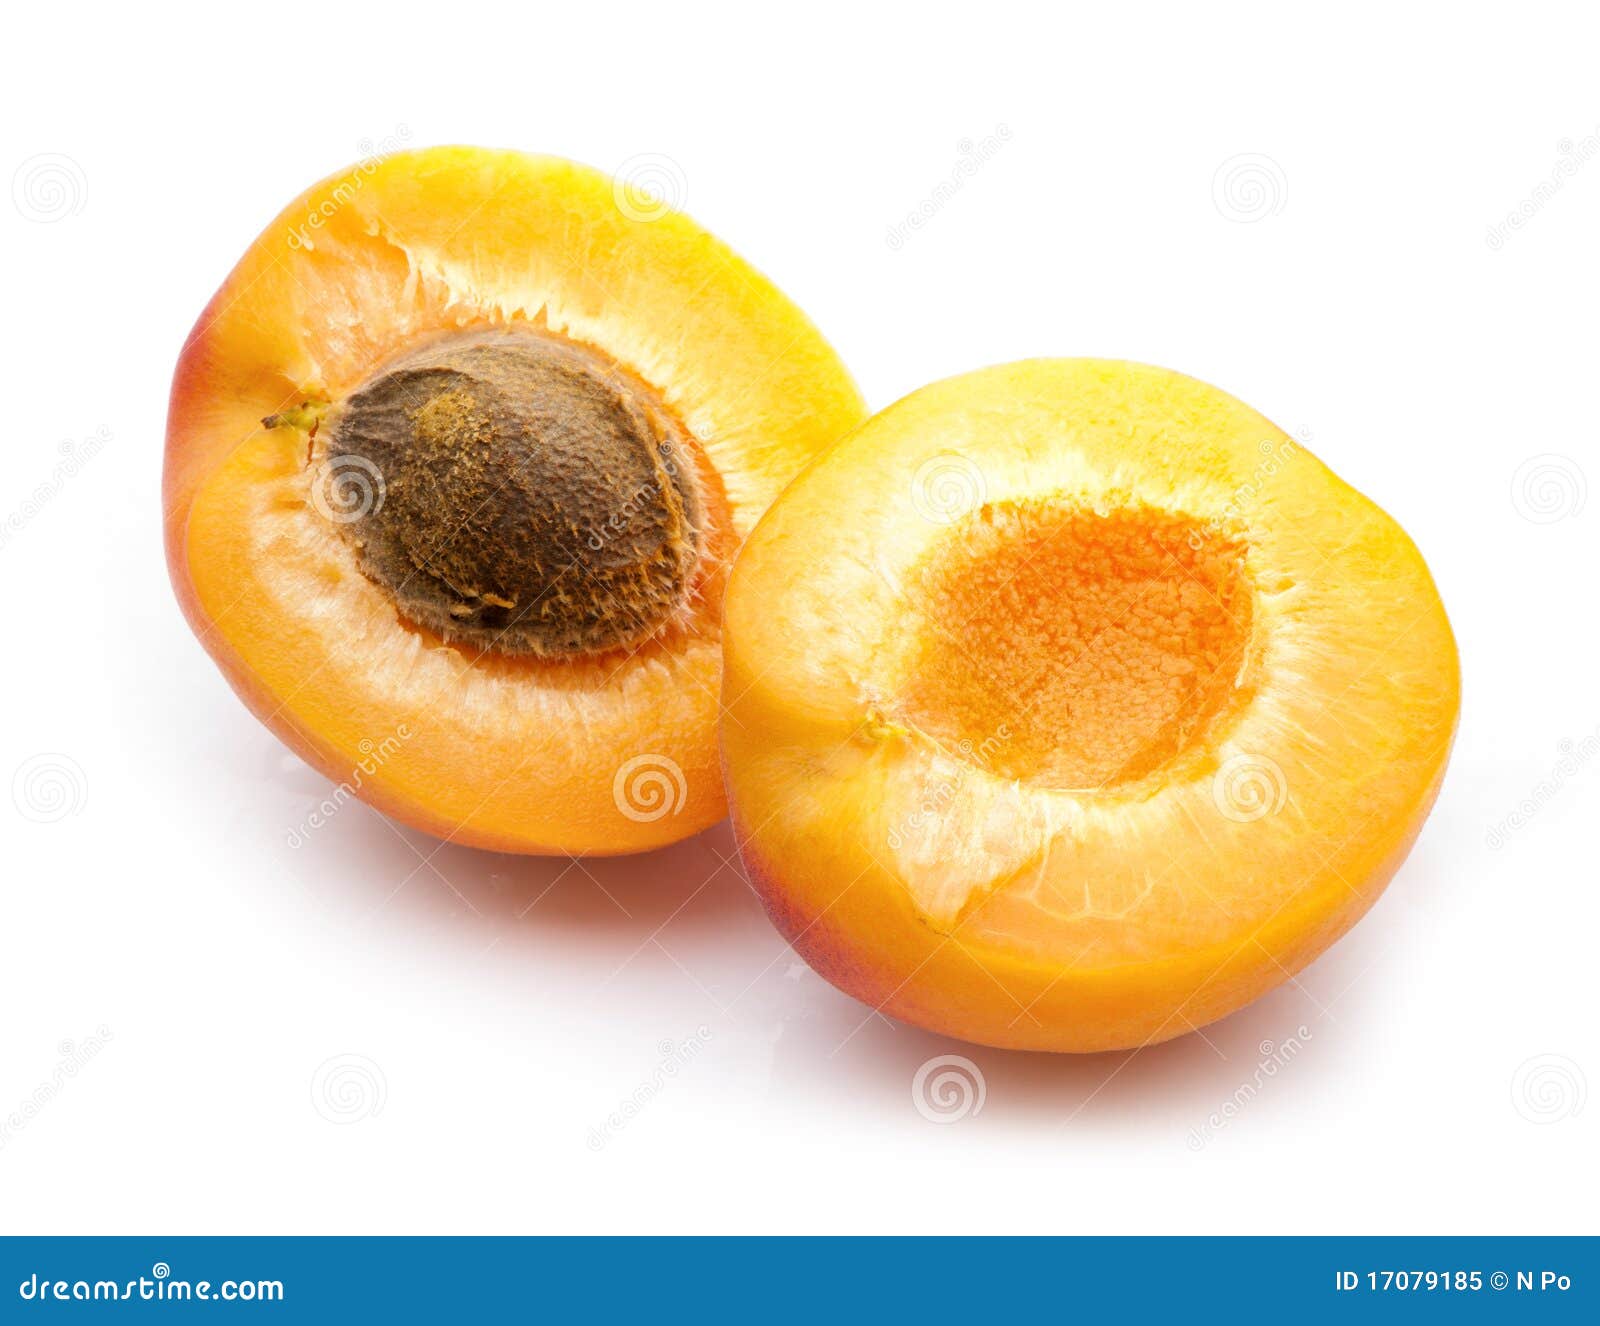 two apricot halves with stone